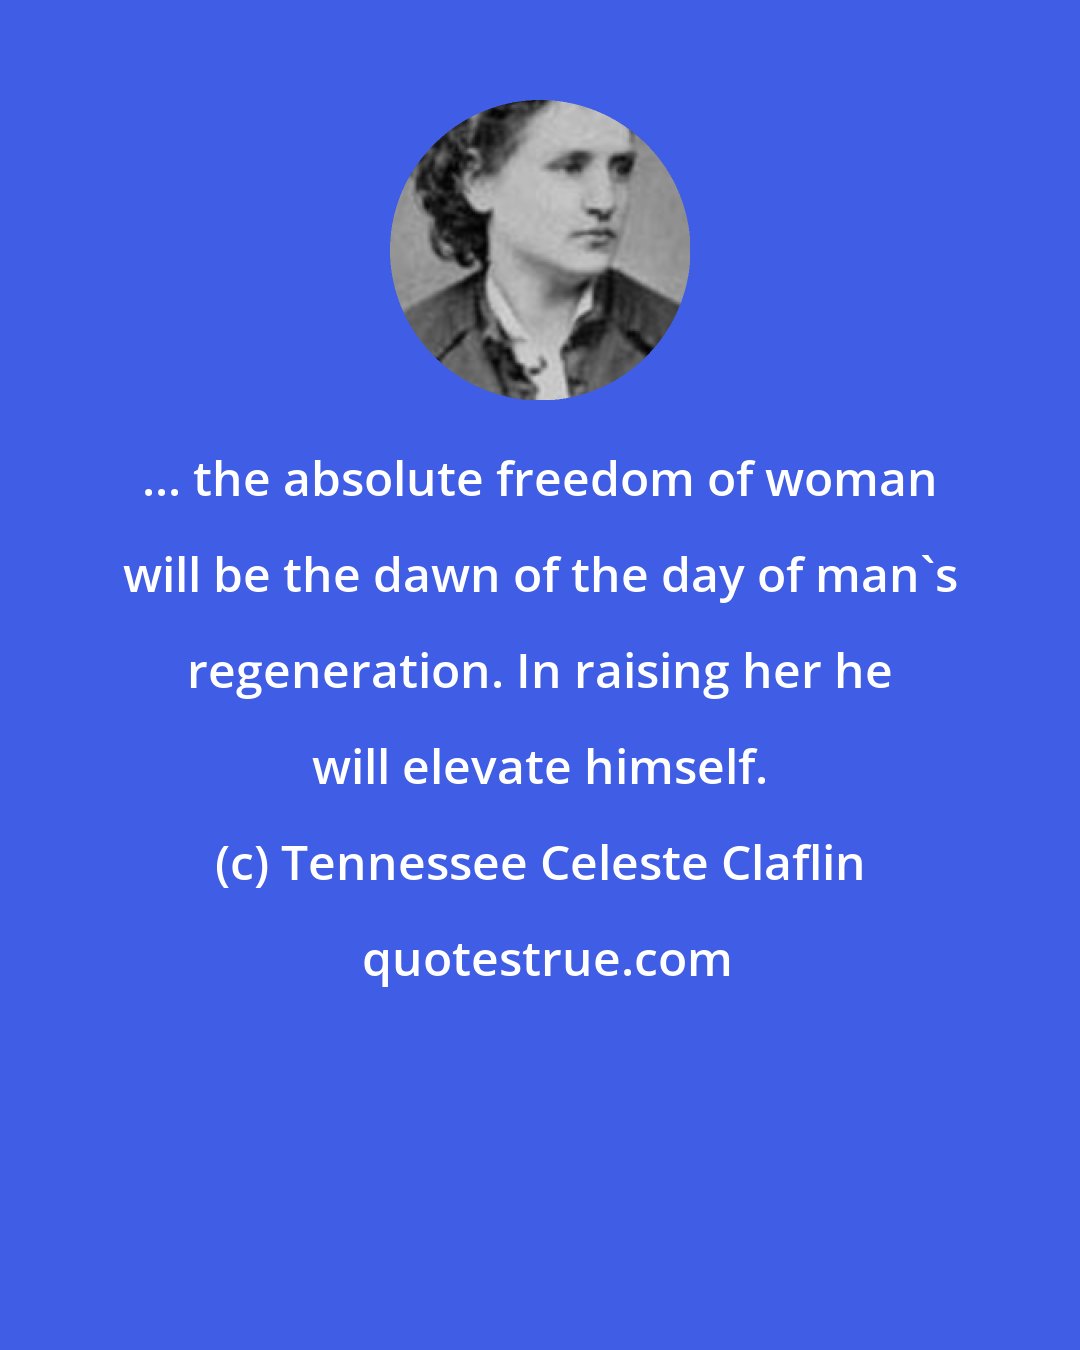 Tennessee Celeste Claflin: ... the absolute freedom of woman will be the dawn of the day of man's regeneration. In raising her he will elevate himself.